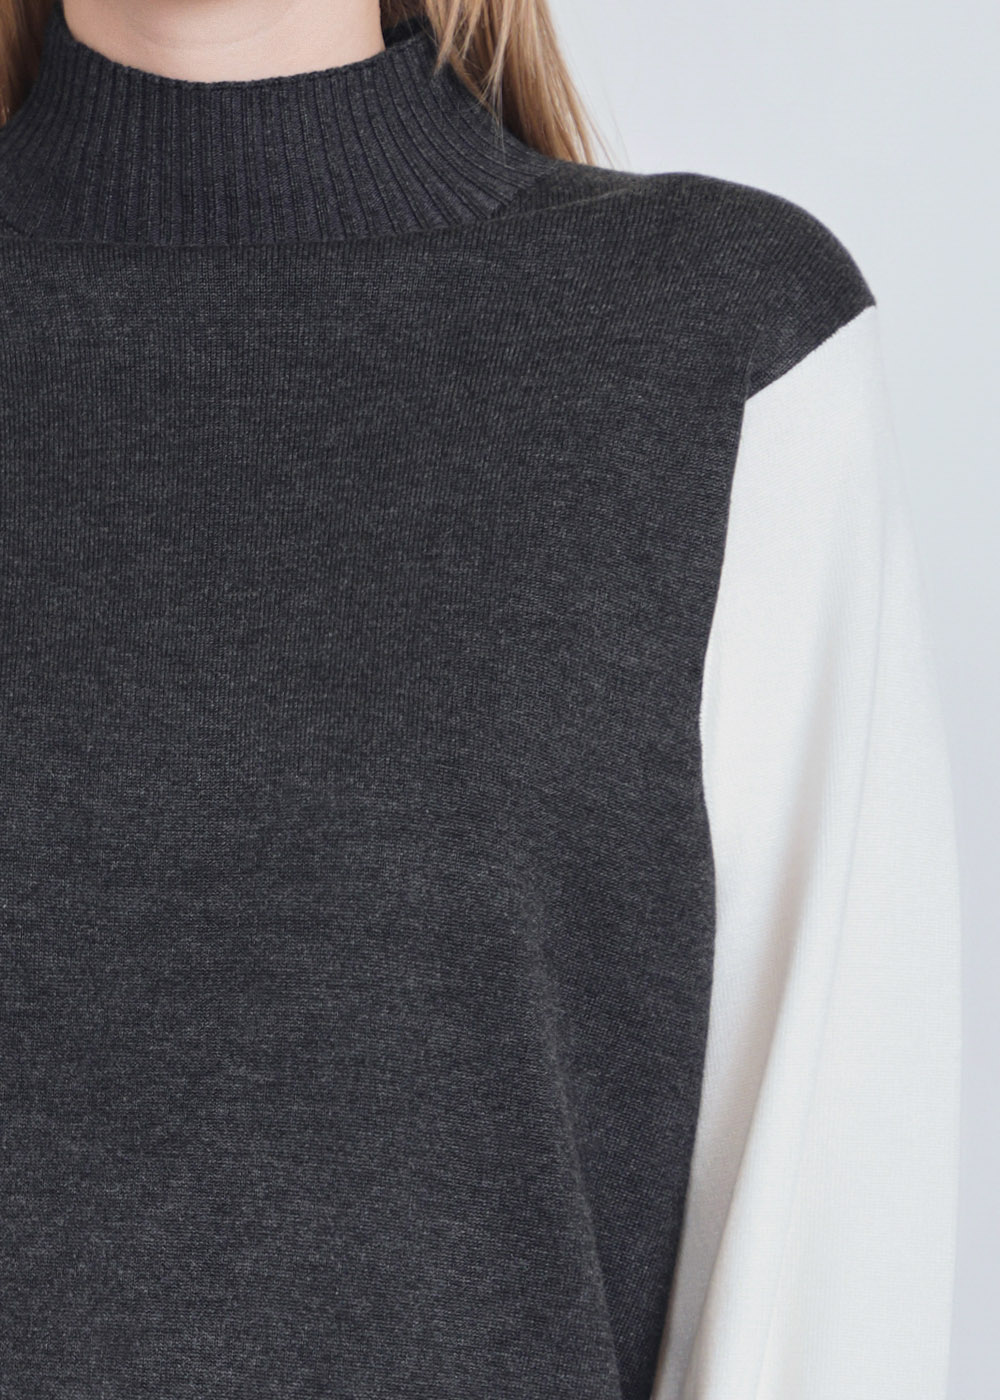 Dual-Shade High-Neck Sweater in Grey & White